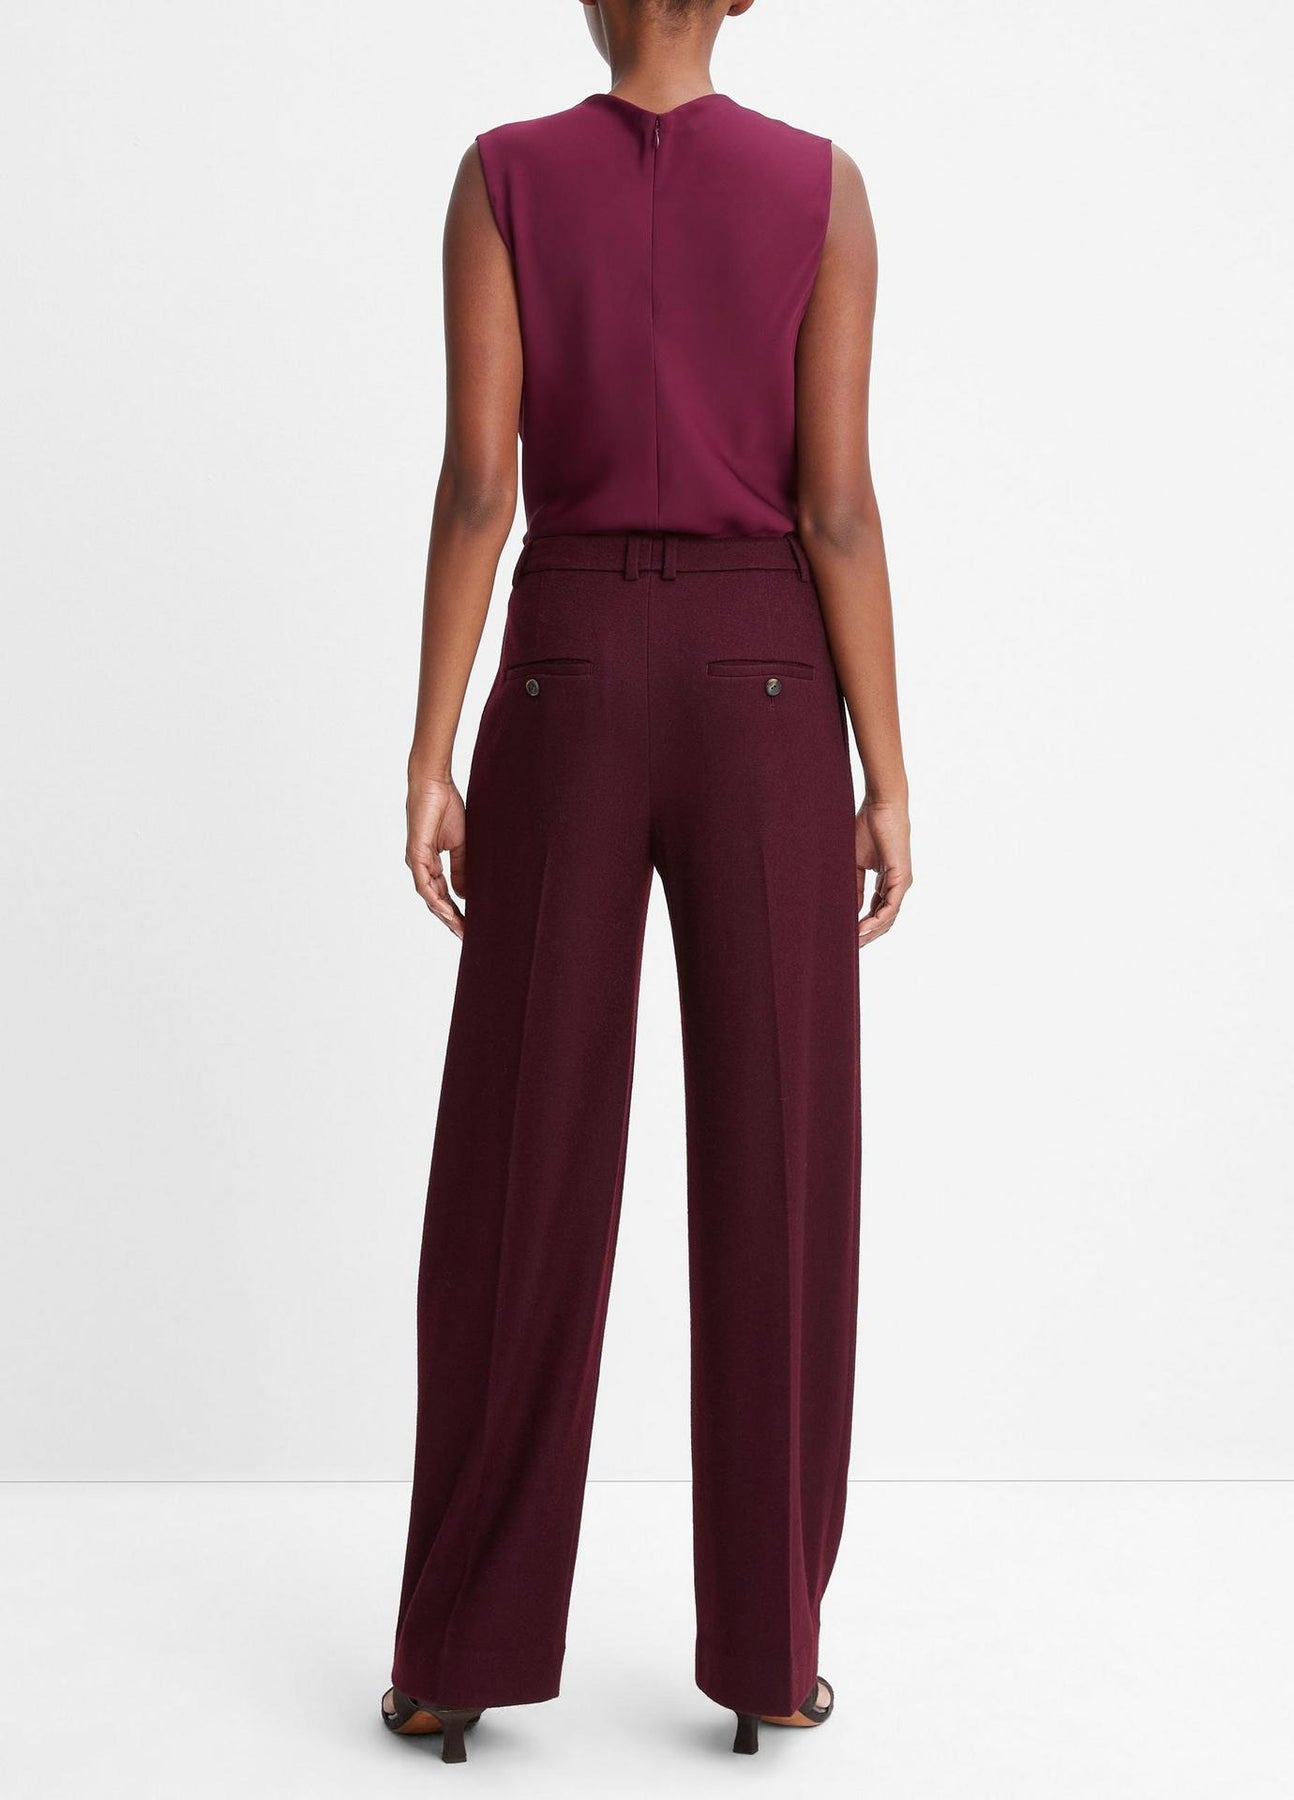 Cozy Wool Pleat Front Pant in Cherry Wine – nk boutique baton rouge